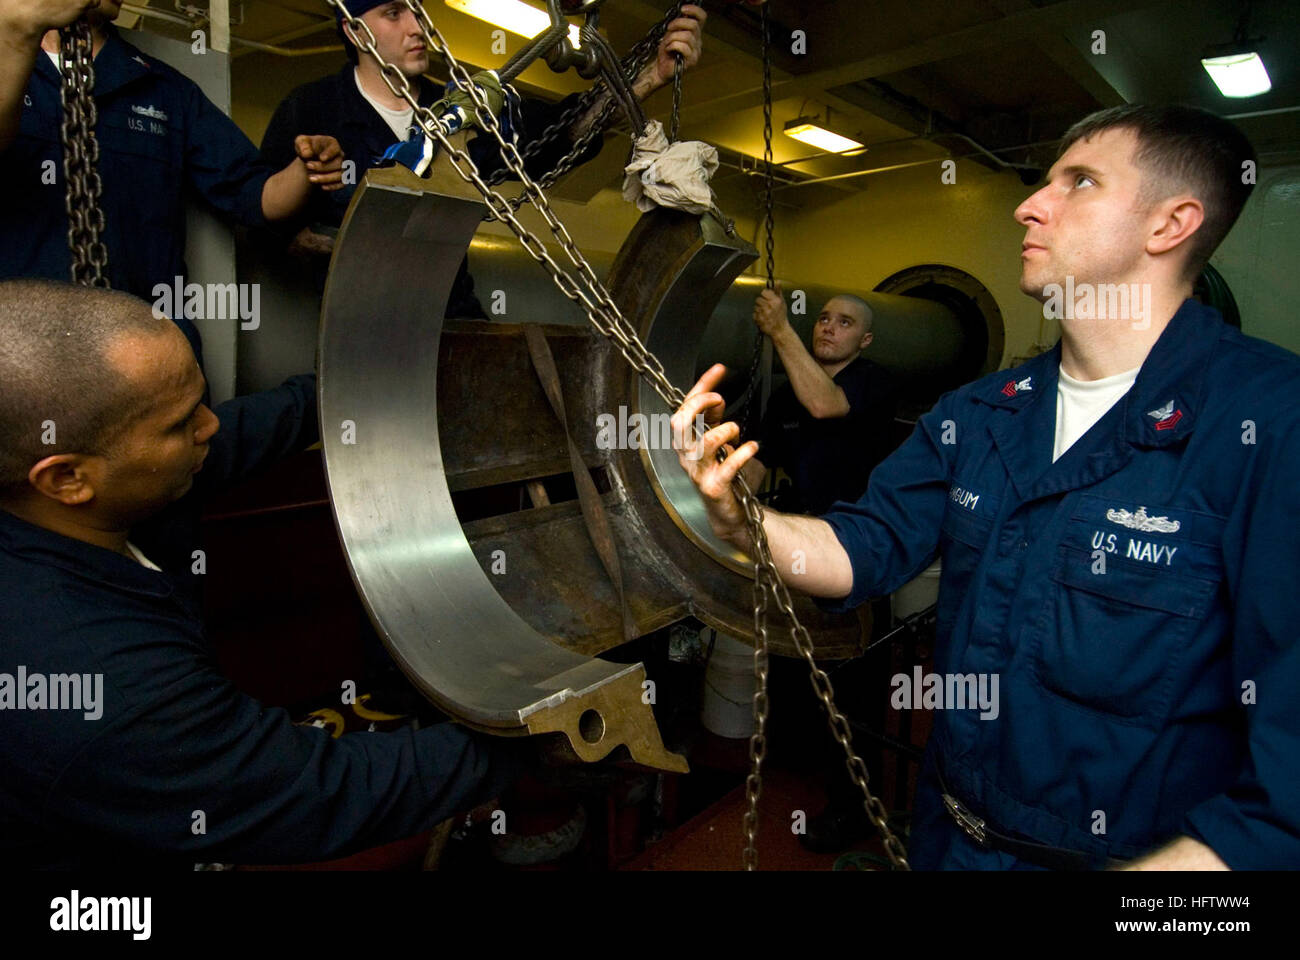 070802-N-9864S-012 PACIFIC OCEAN (Aug. 2, 2007) - Machinist's Mate 1st Class Eddie Mangum raises the upper shell of one of the USS Kitty Hawk's (CV 63) shaft bearing housings with a chain fall while the shell is being removed.  Once the shell is removed and placed upside down, the Sailors will be able to see any grooves cut into it by the shaft. They will then smooth out the shaft and shell to get a perfect fit. Kitty Hawk is entering its 3rd month of a summer deployment from Fleet Activities Yokosuka, Japan. U.S. Navy photo by Mass Communication Specialist Joseph R Schmitt (RELEASED) US Navy  Stock Photo